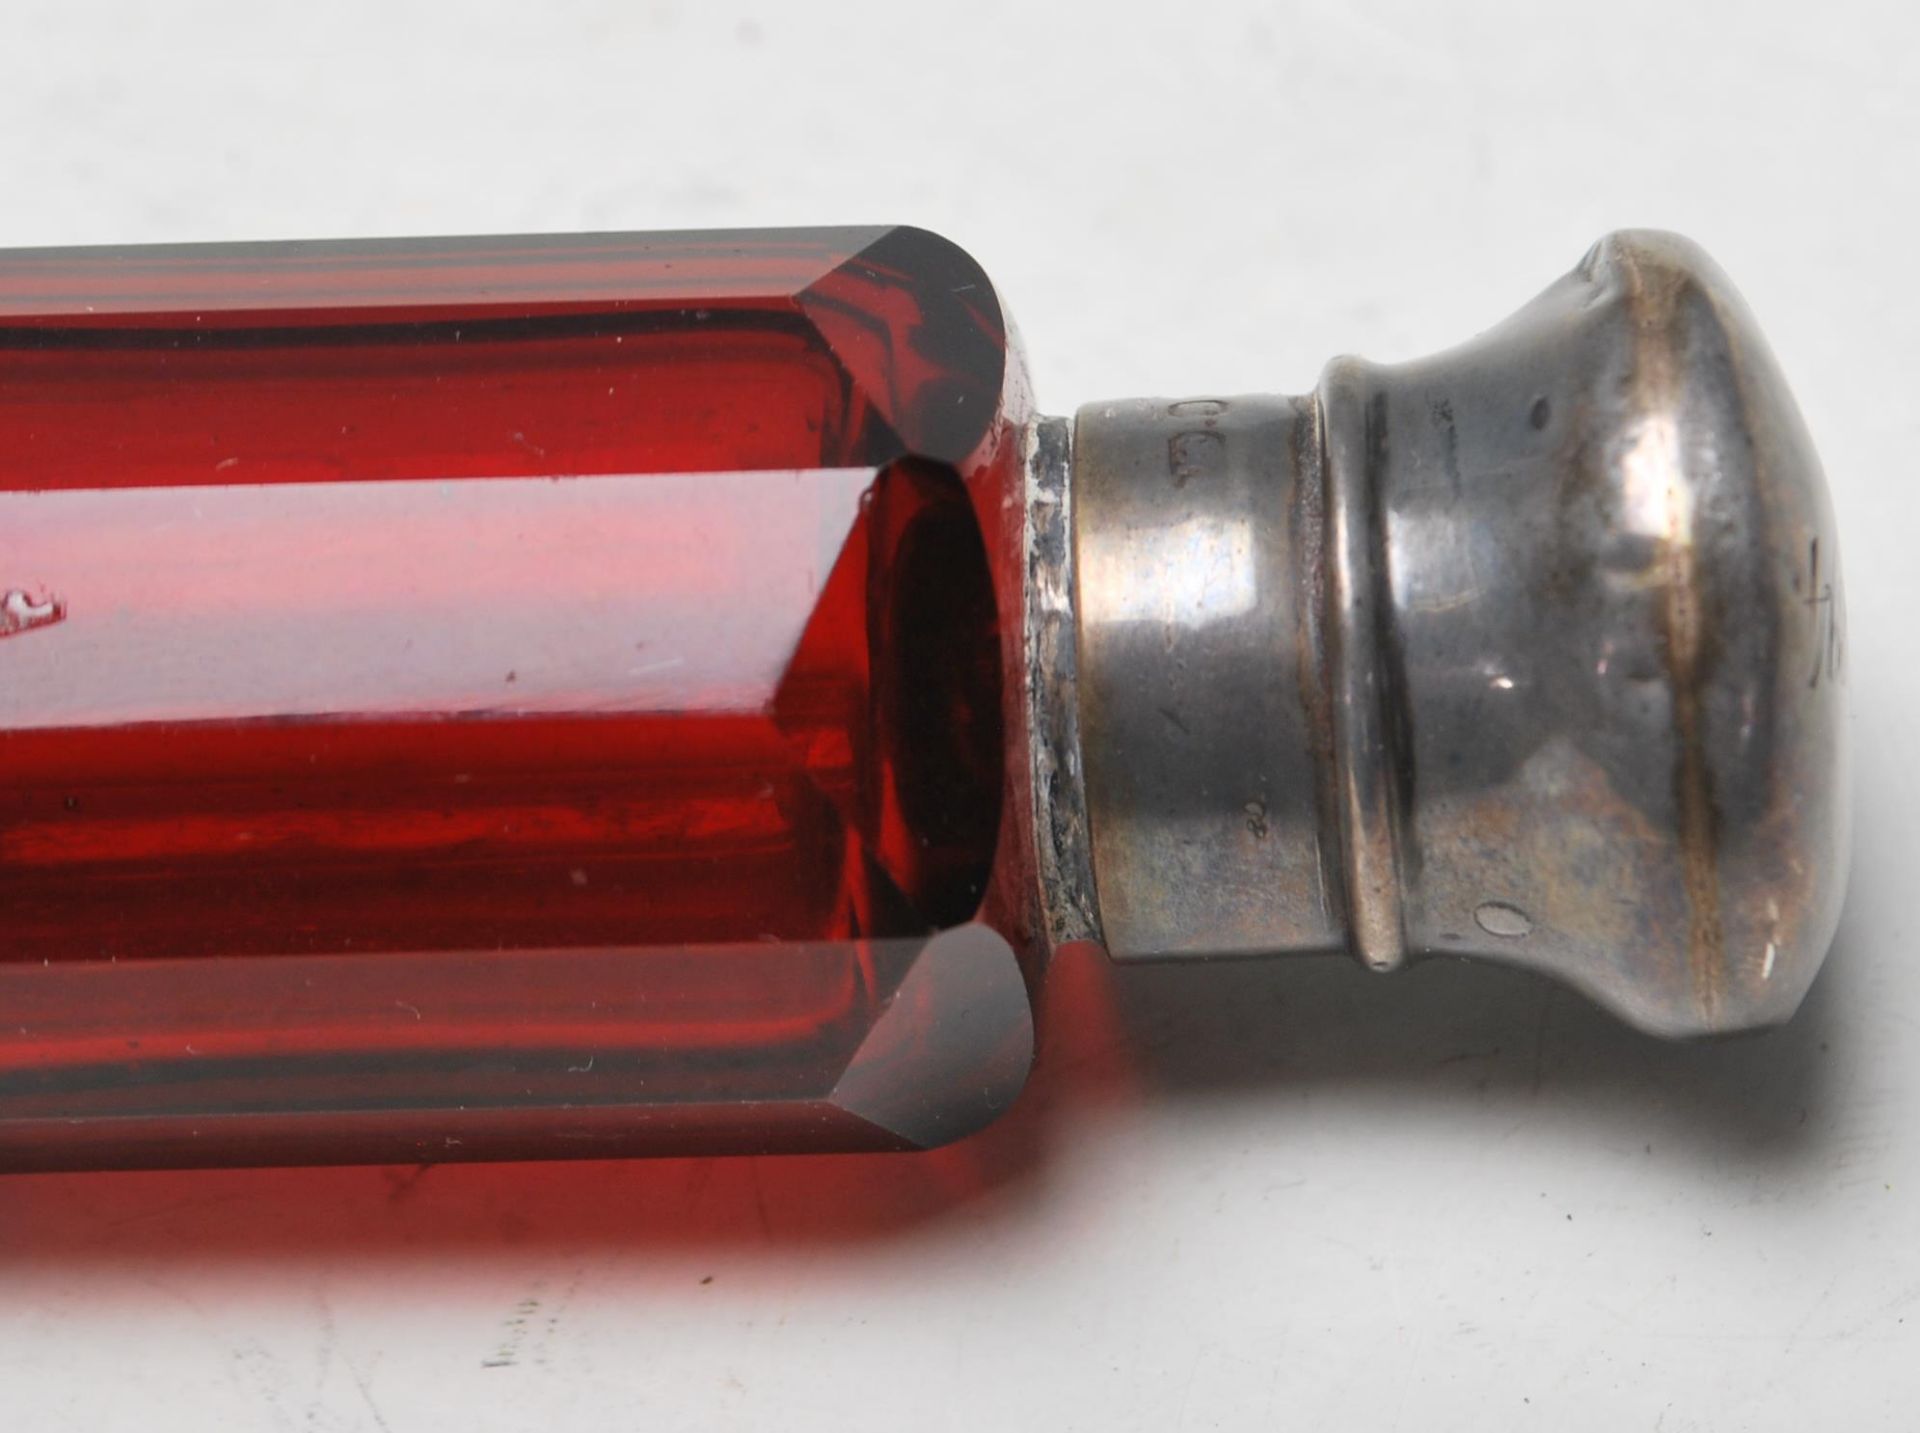 VICTORIAN SILVER AND RUBY GLASS PERFUME BOTTLE - Image 3 of 6